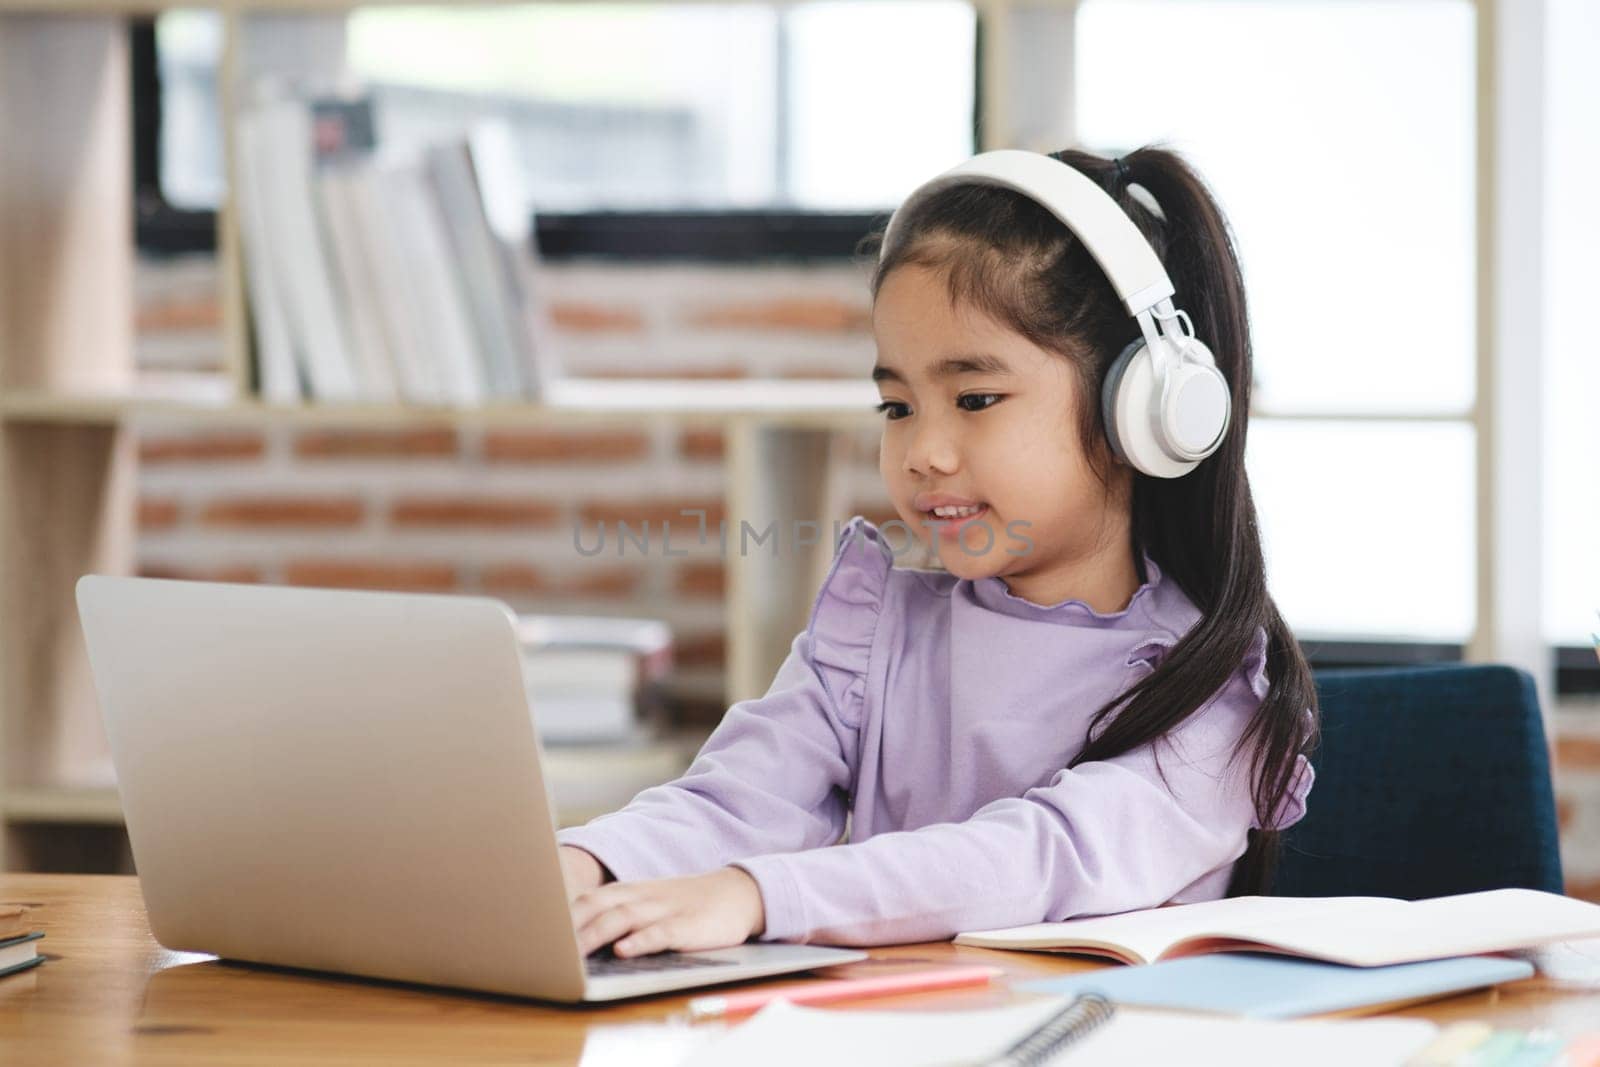 A young girl is sitting at a desk with a laptop and headphones on by ijeab